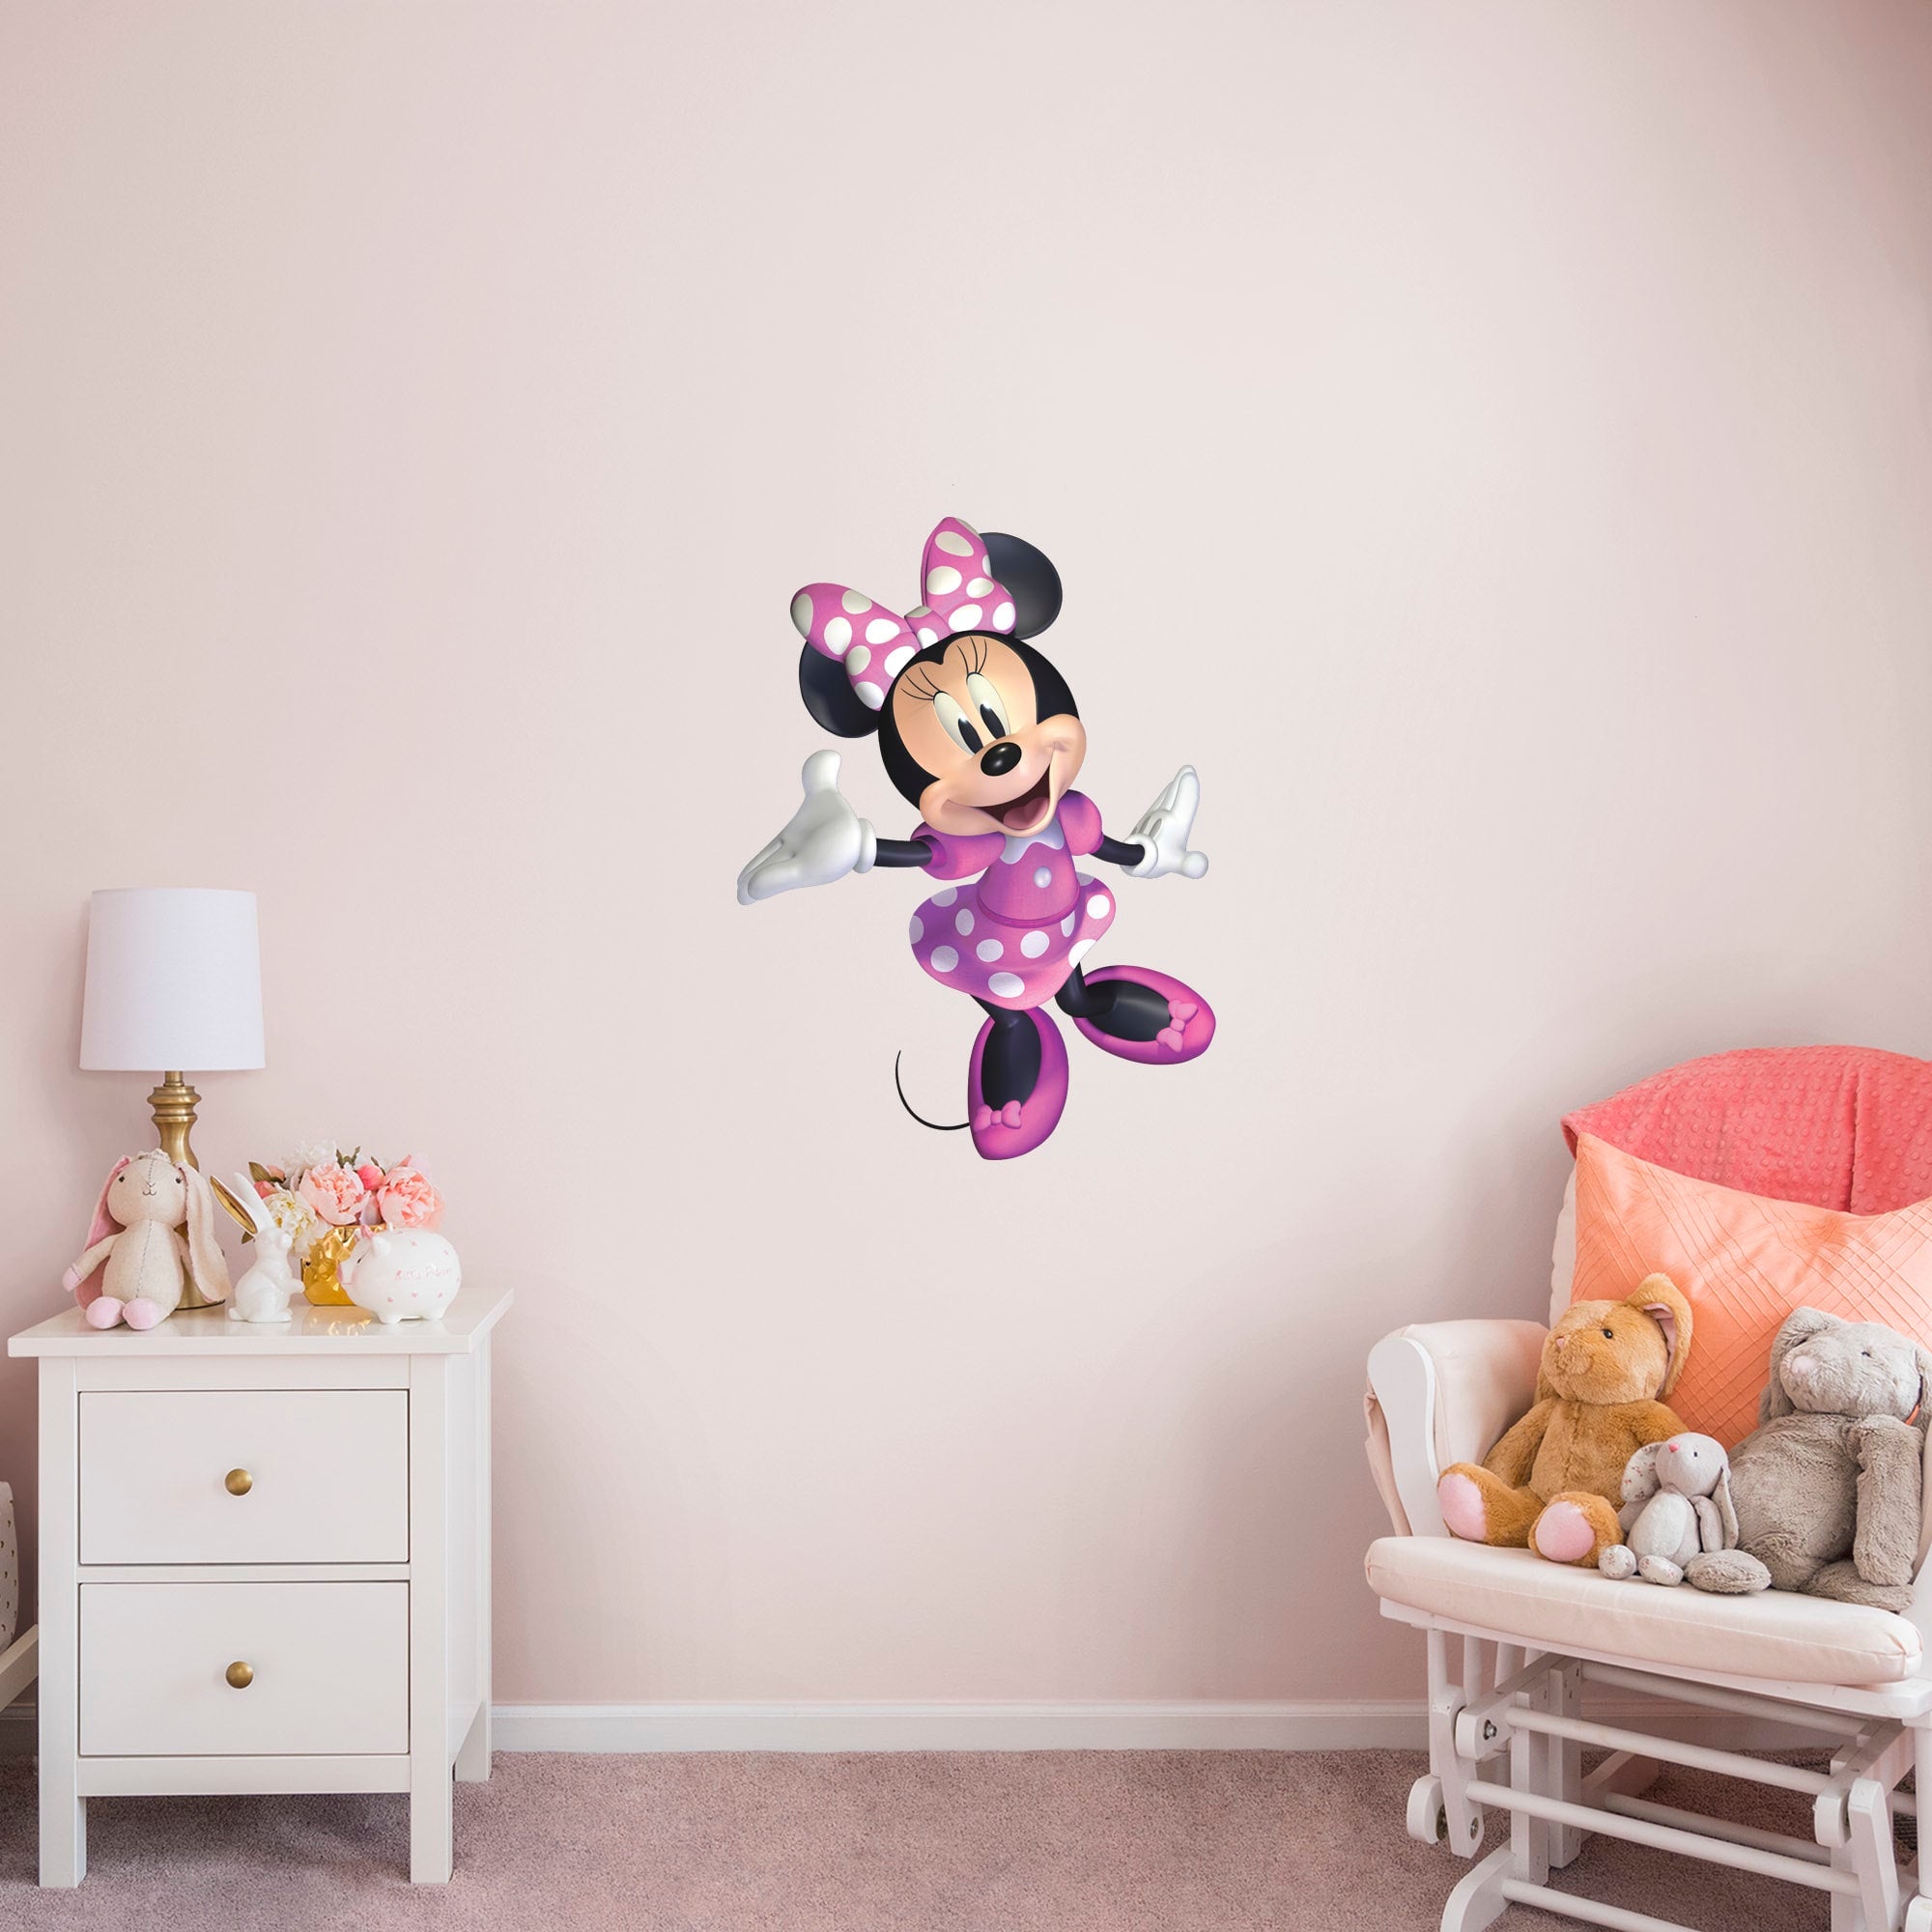 Minnie Mouse - Officially Licensed Disney Removable Wall Decal XL by Fathead | Vinyl